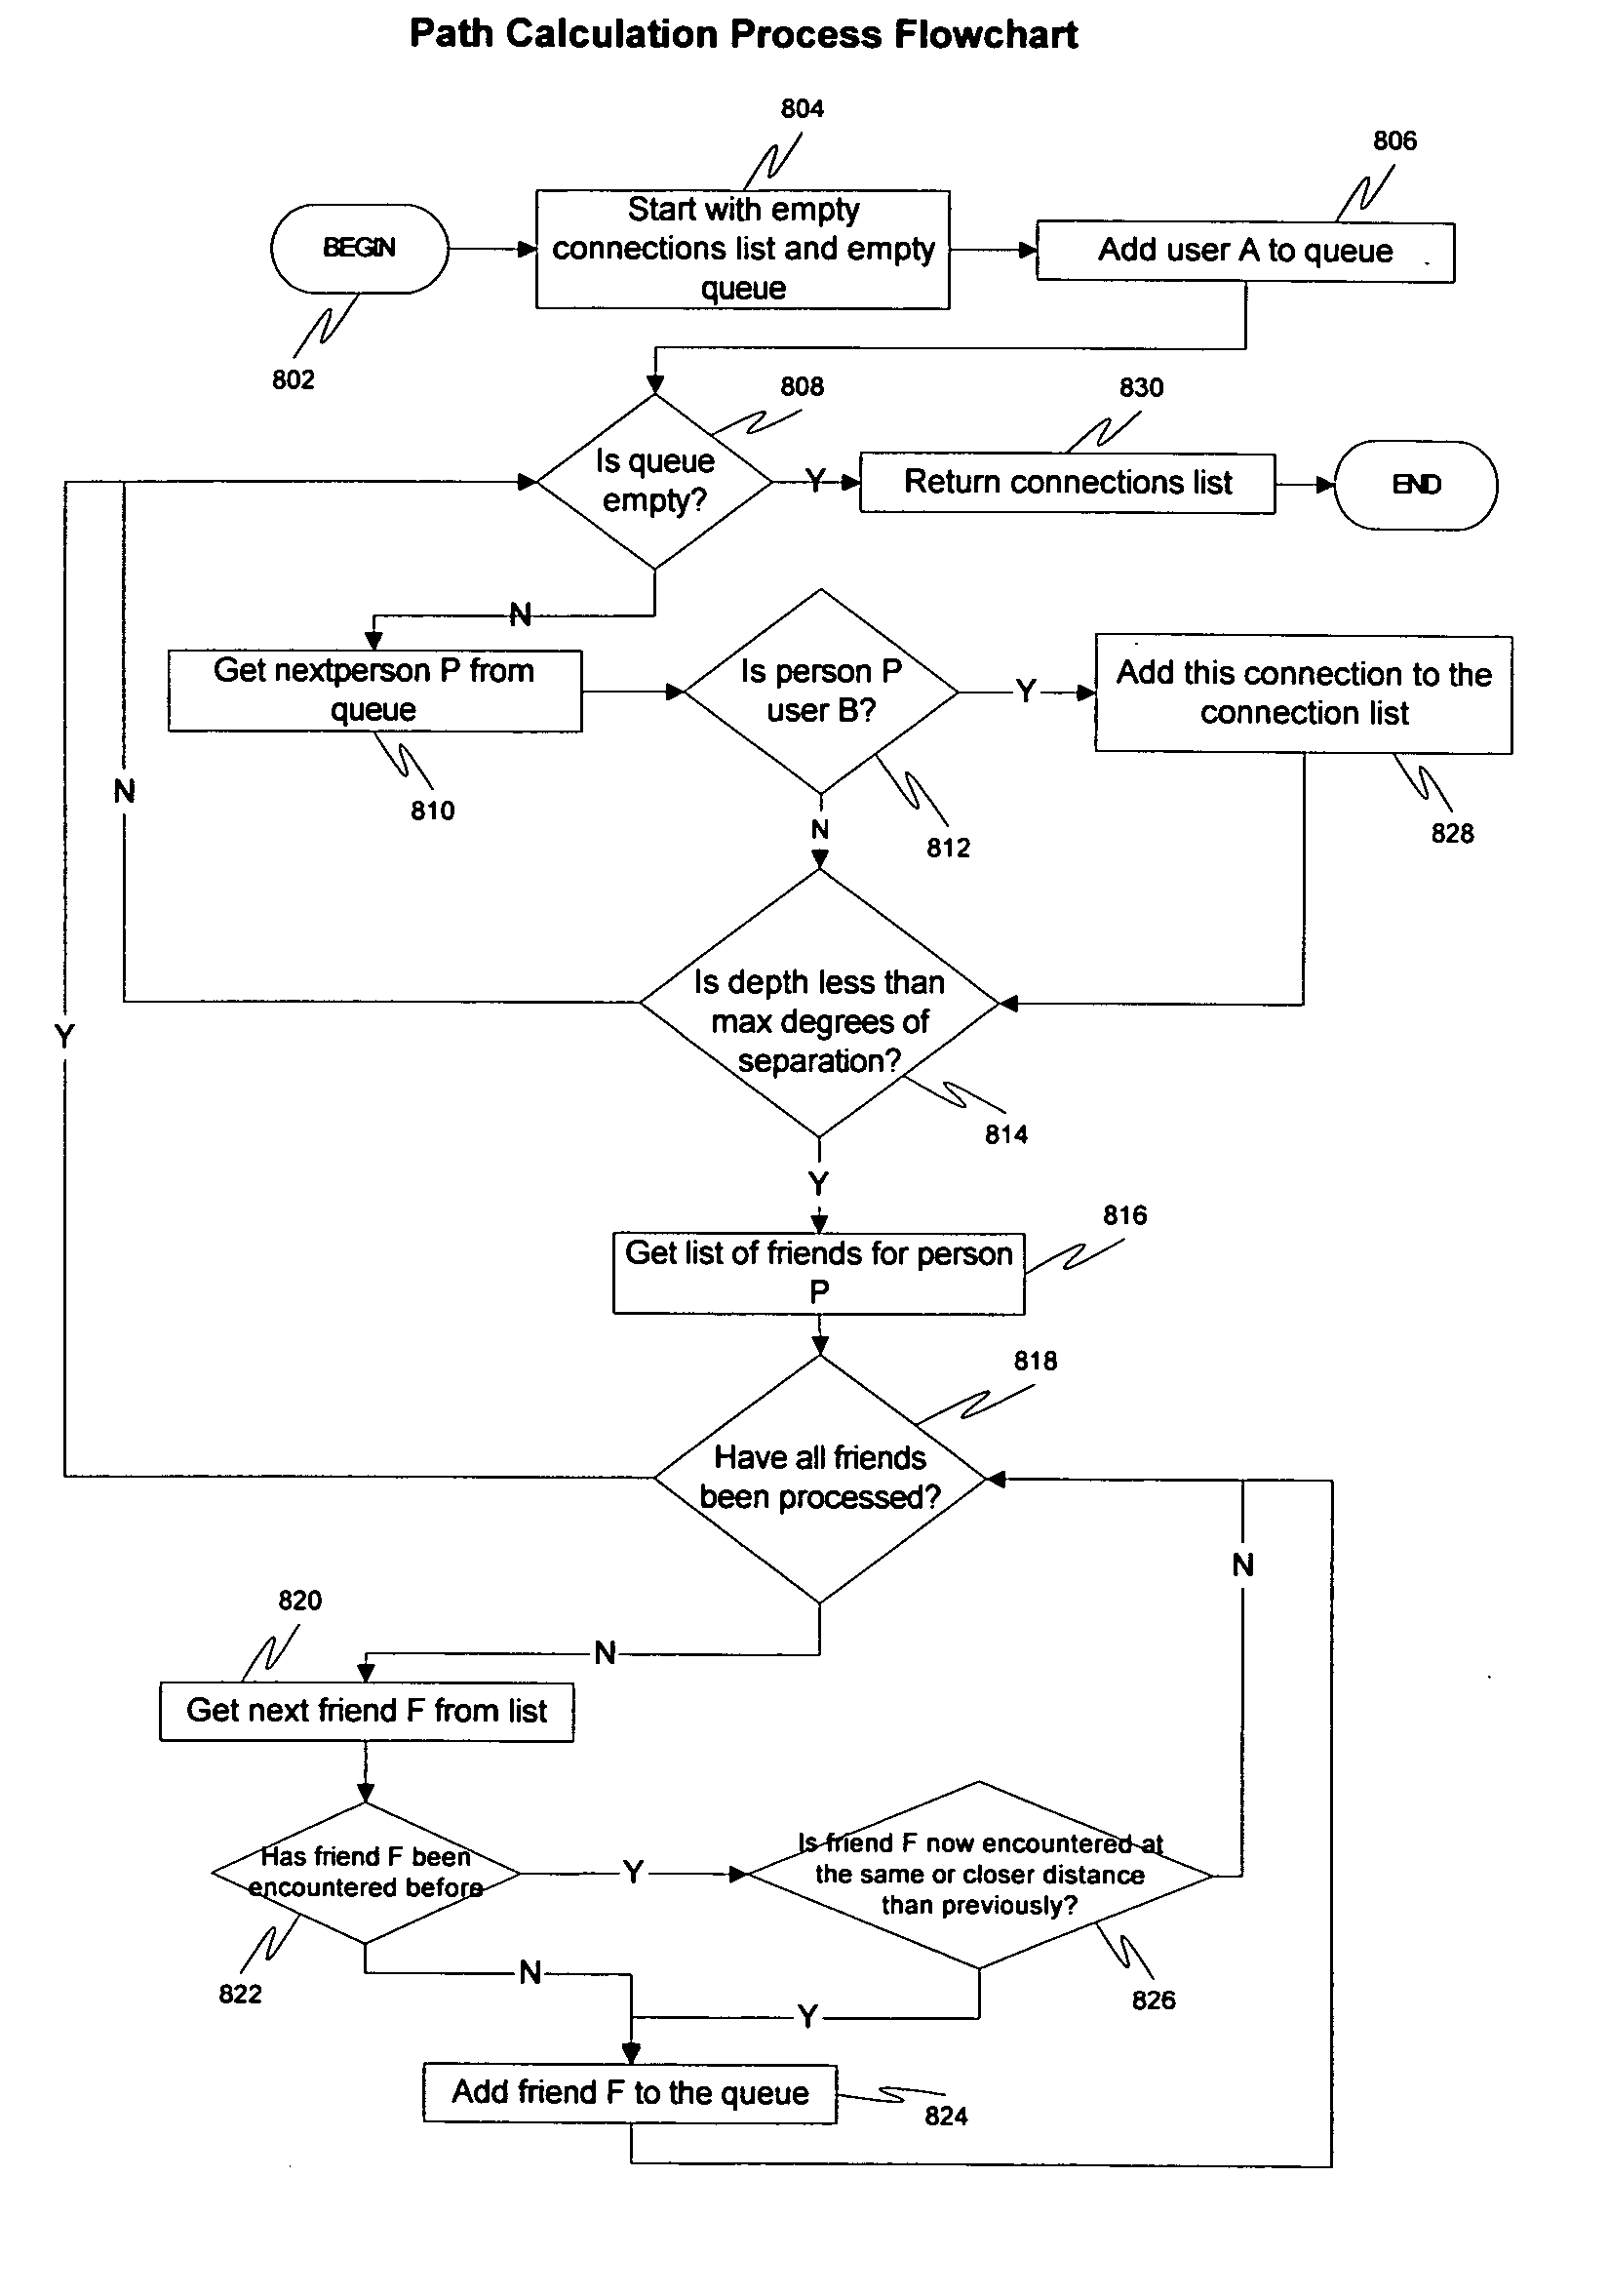 System, method and apparatus for connecting users in an online computer system based on their relationships within social networks